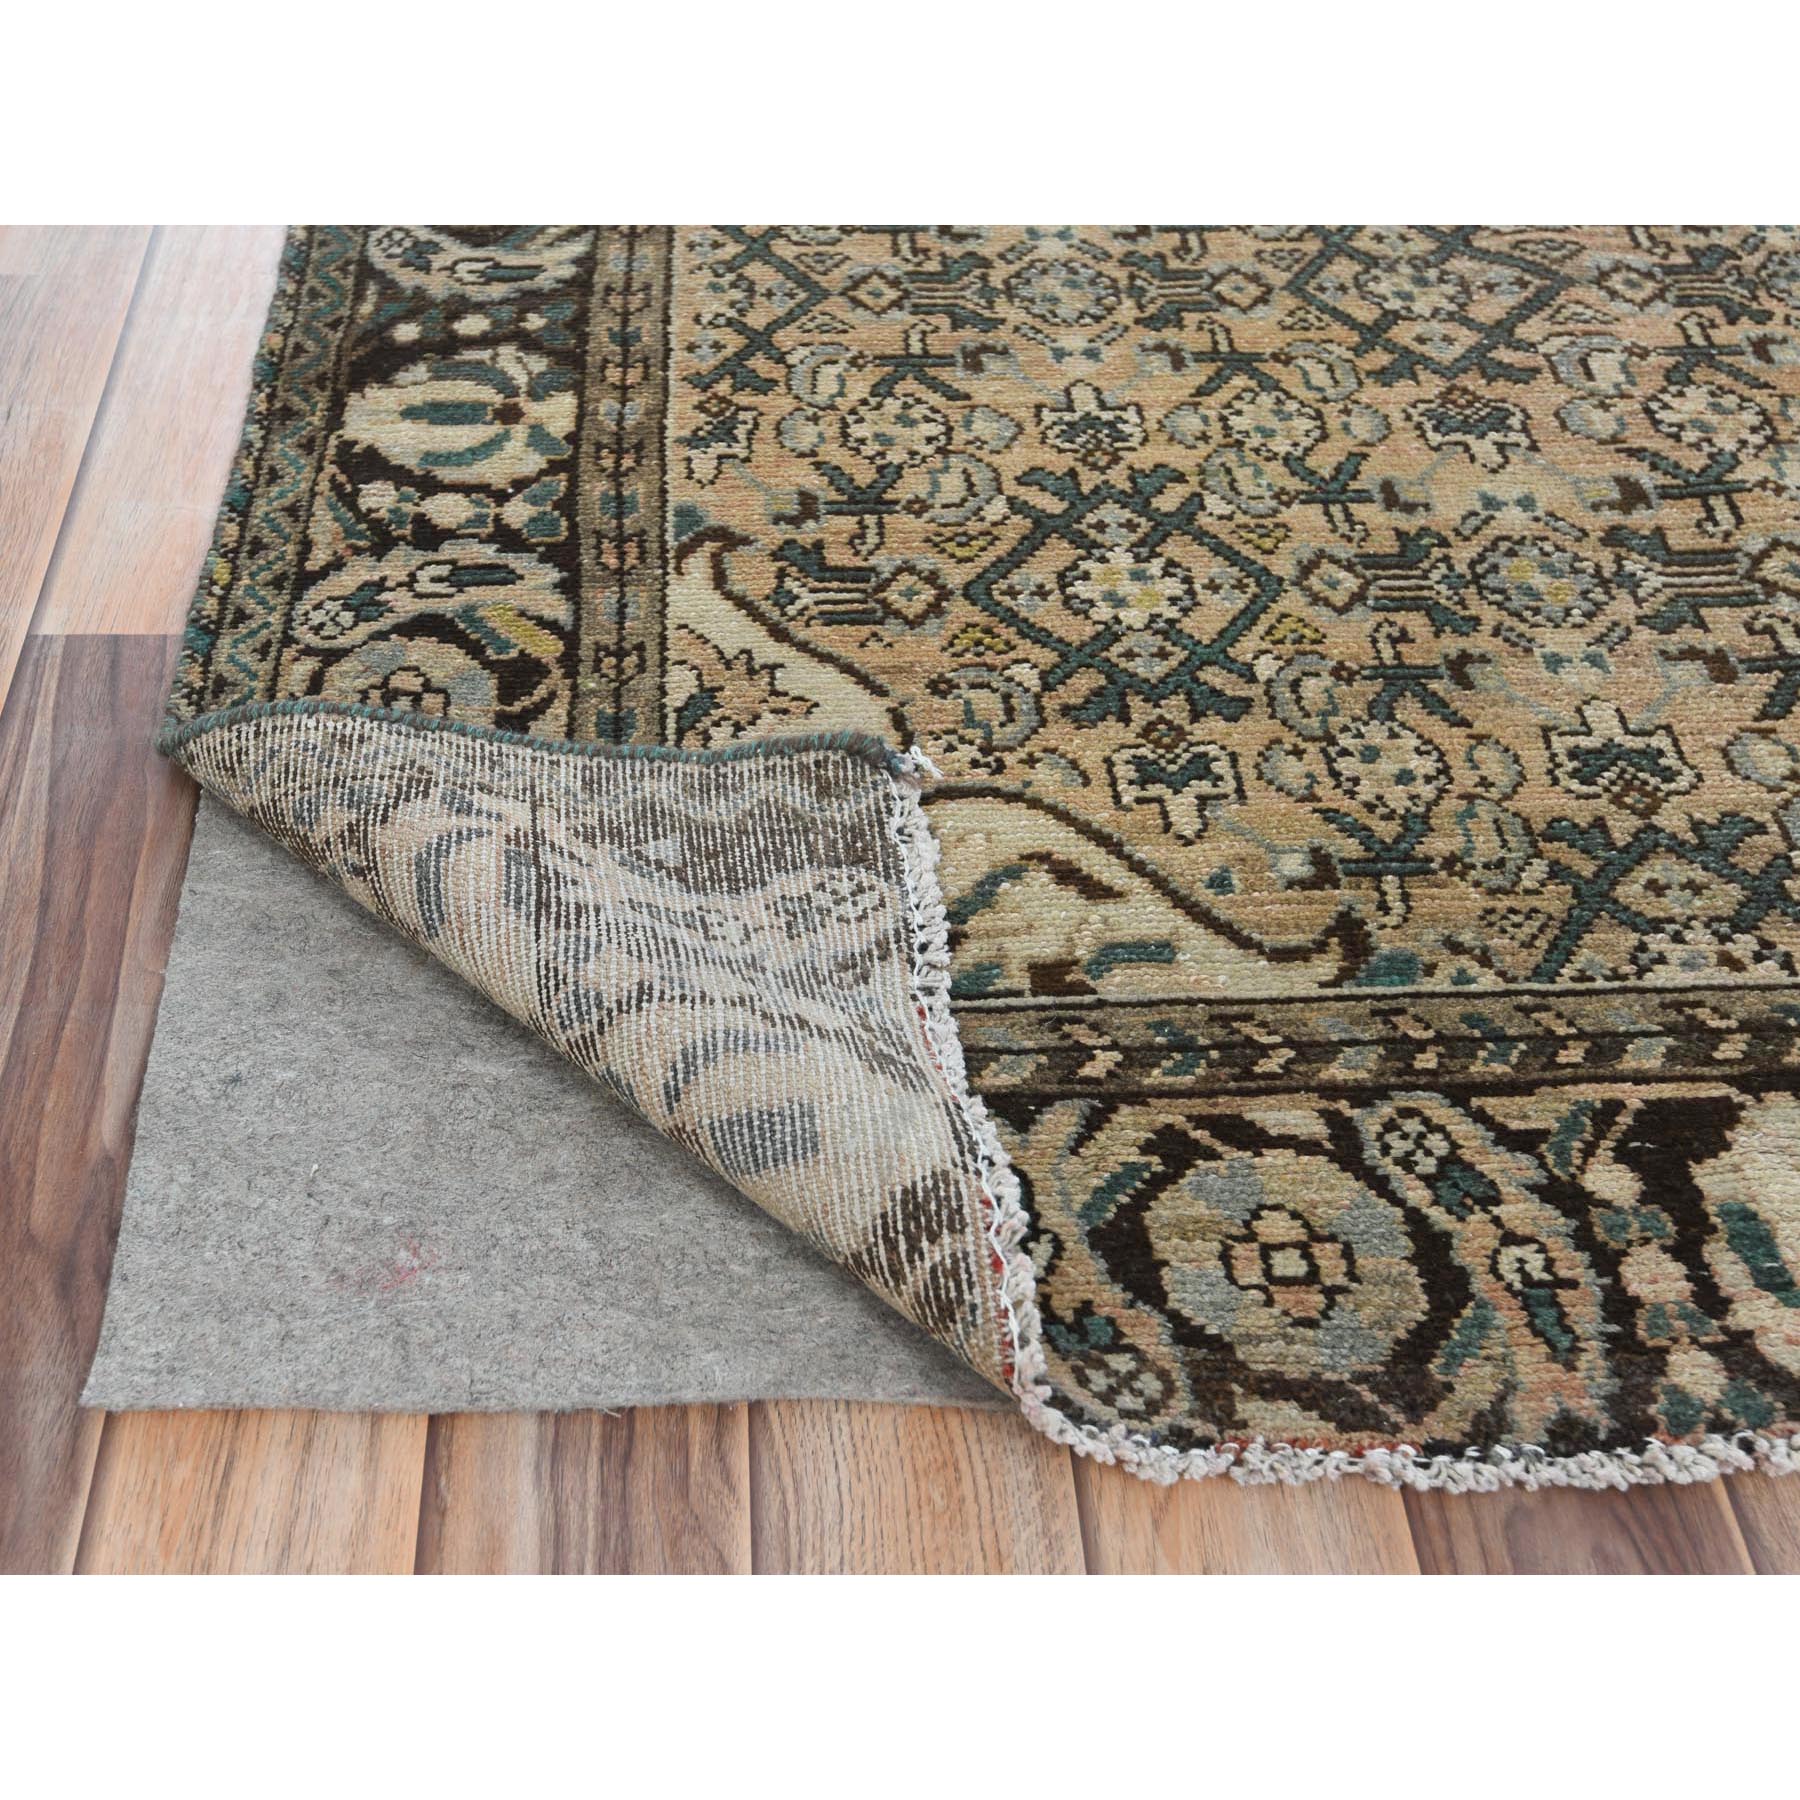 4'x9'9" Light Brown, Fish Mahi All Over Design Vintage Persian Hamadan with Abrash, Hand Woven, Worn Down, Distressed Look, Pure Wool Wide Runner Oriental Rug 